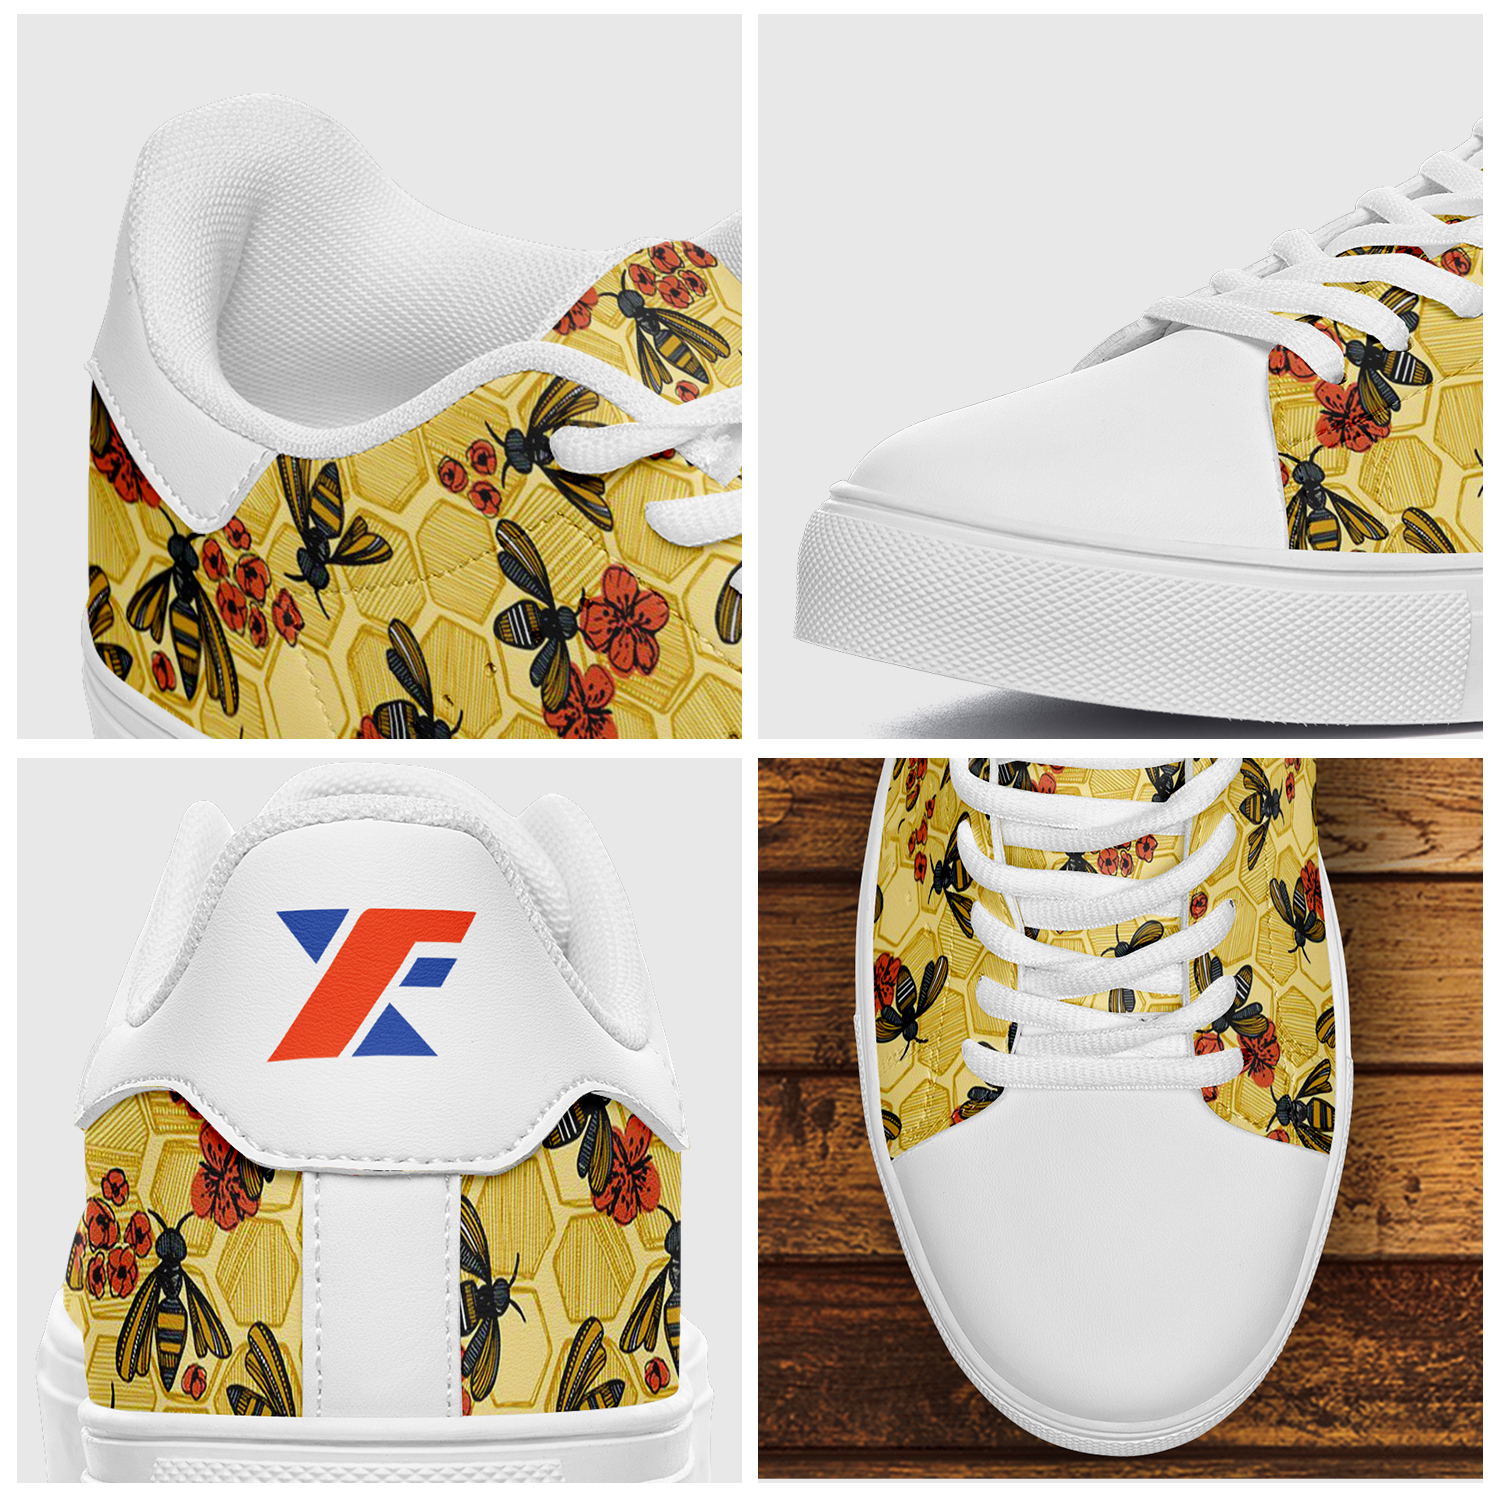 Newest Design Casual Shoes | Customize Printed Logo Picture & Photo On Your Sneakers